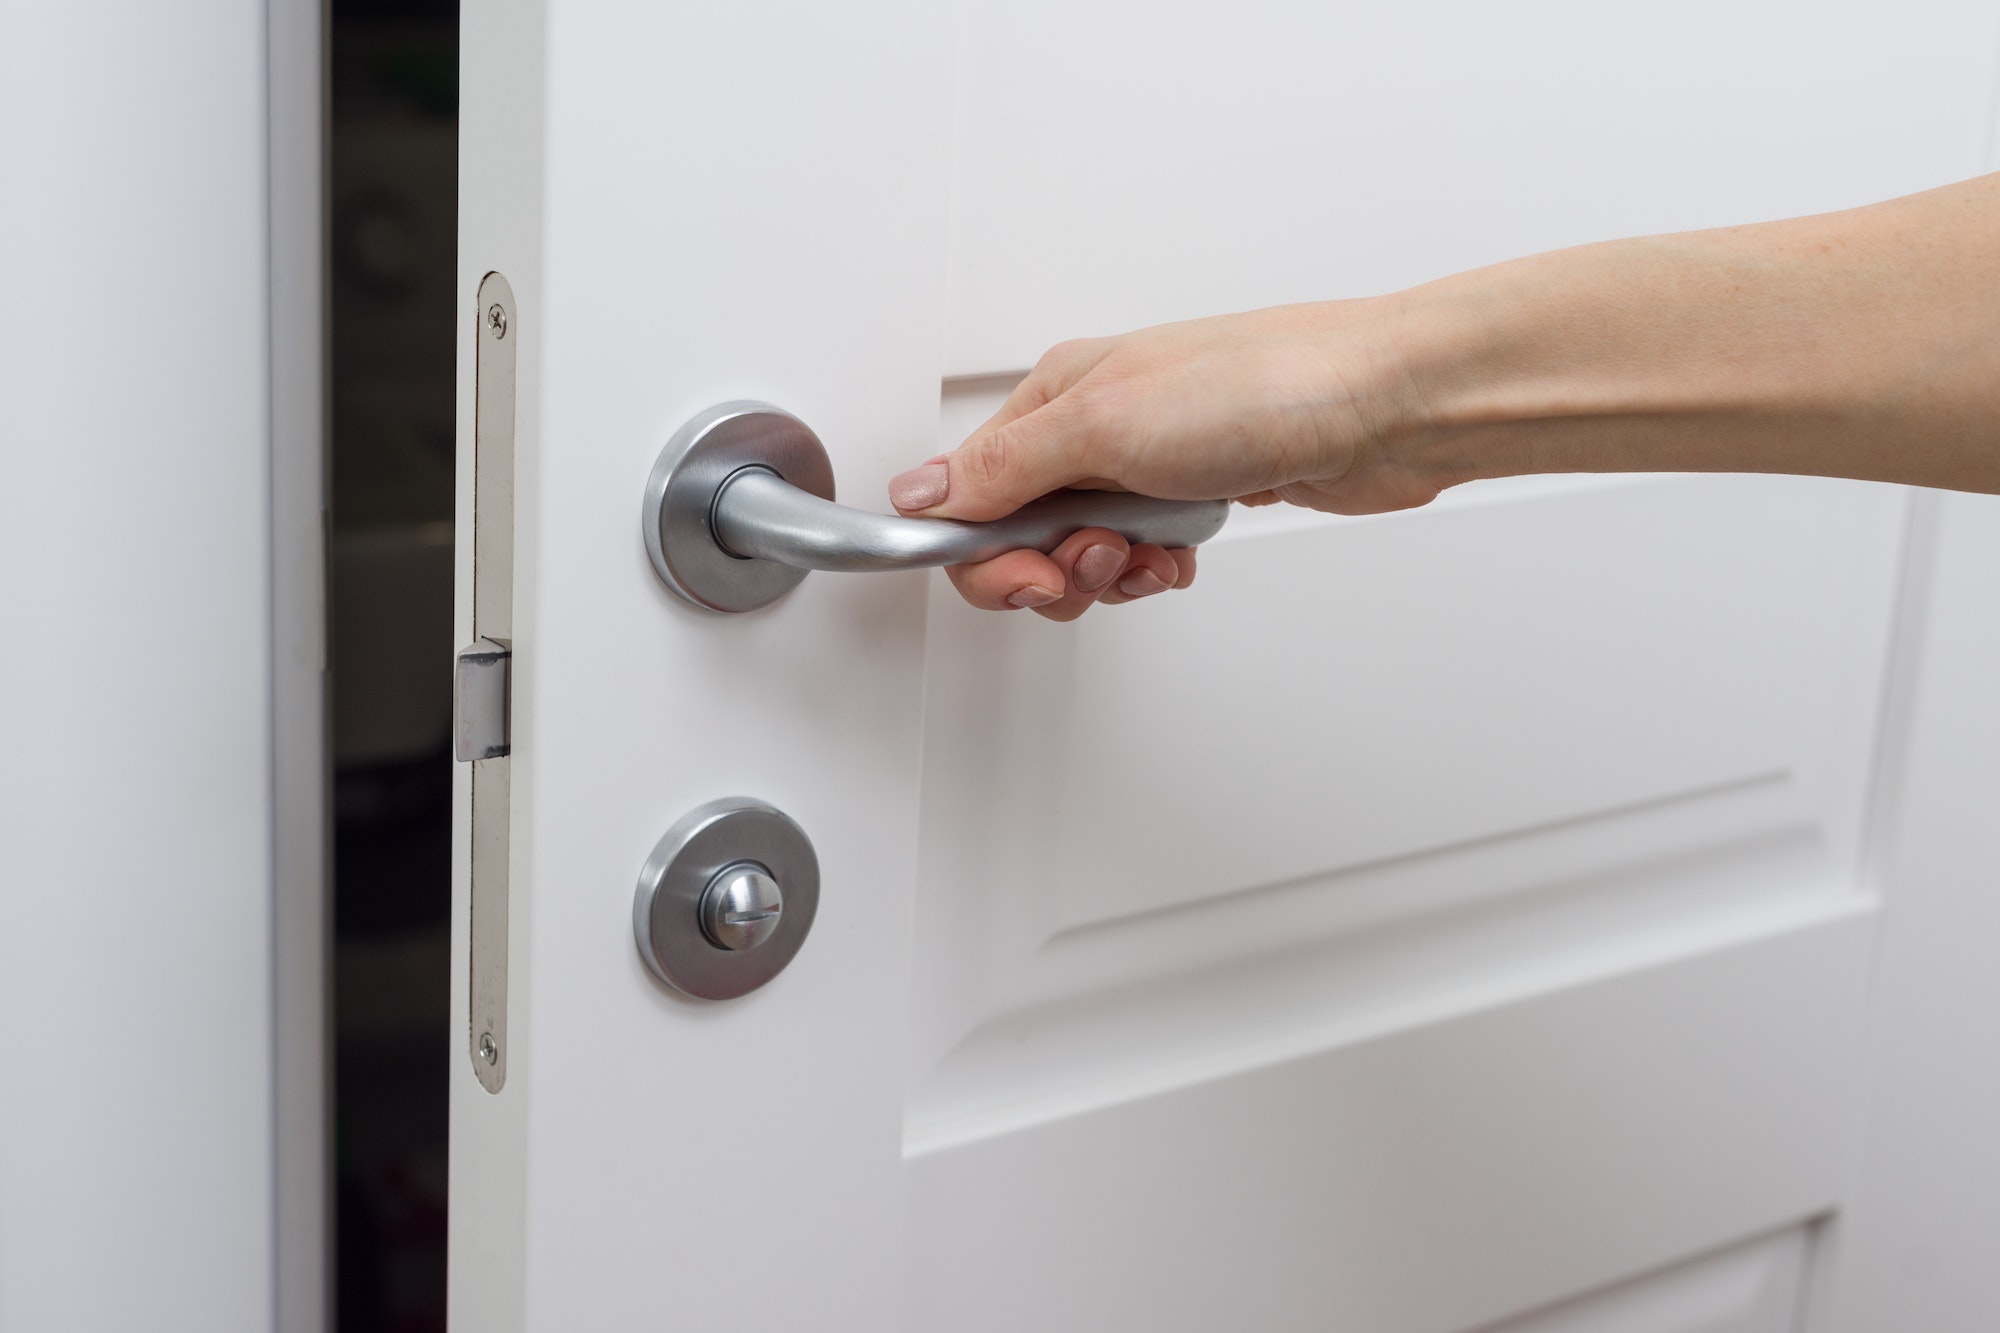 The hand opens the door slightly. Detail of a white interior door with a chrome door handle and